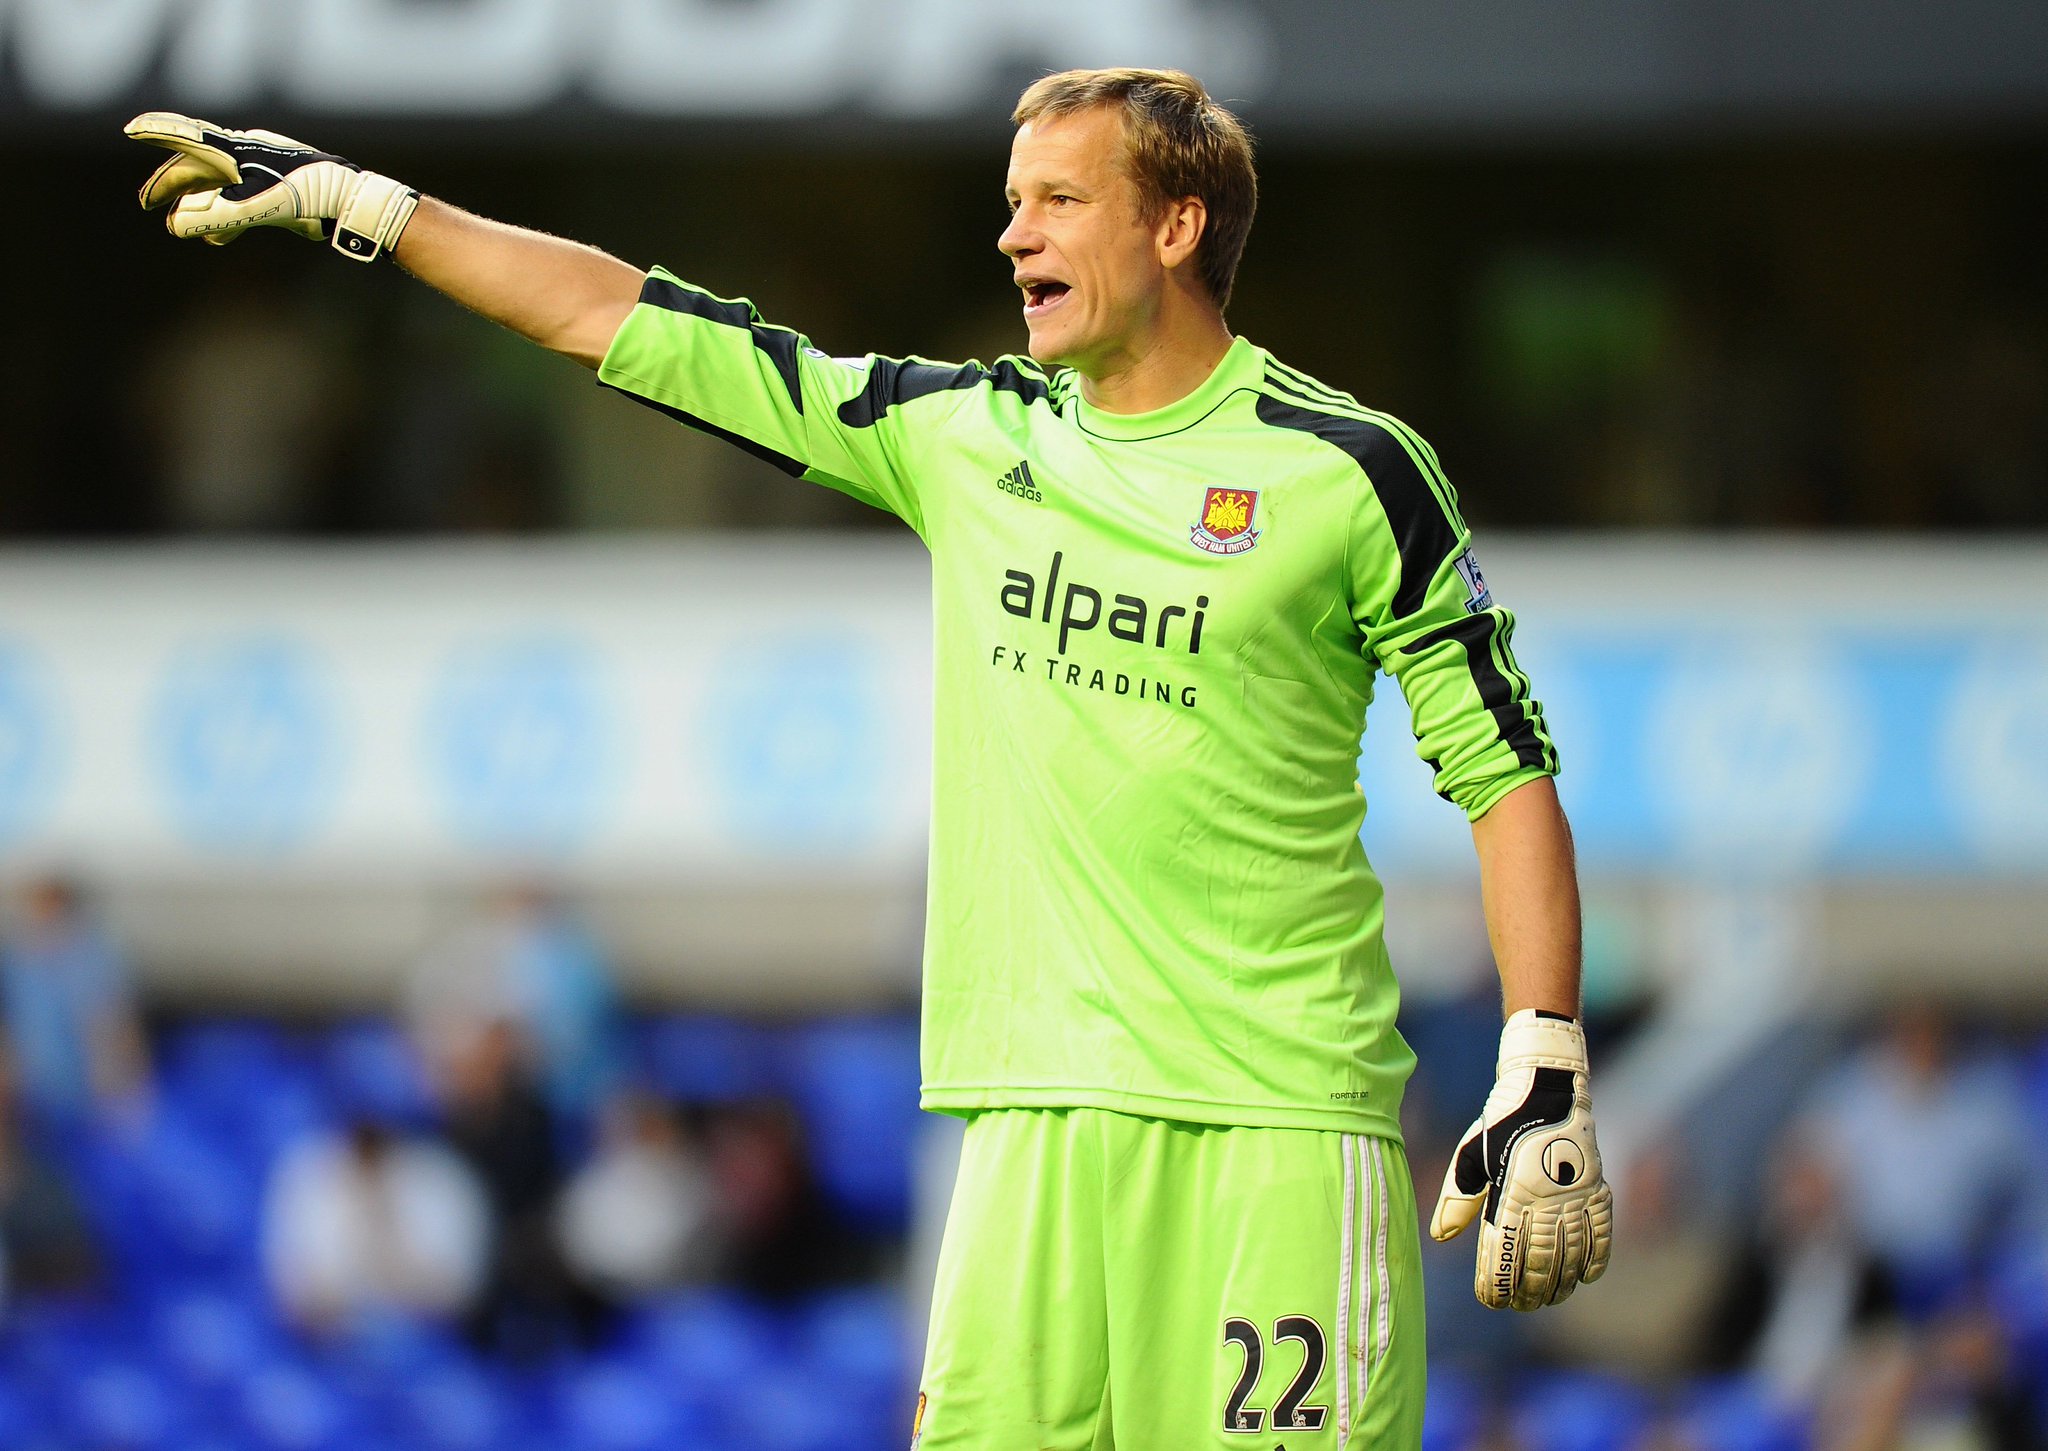 Happy birthday, Jussi Jaaskelainen! Have a great day! 